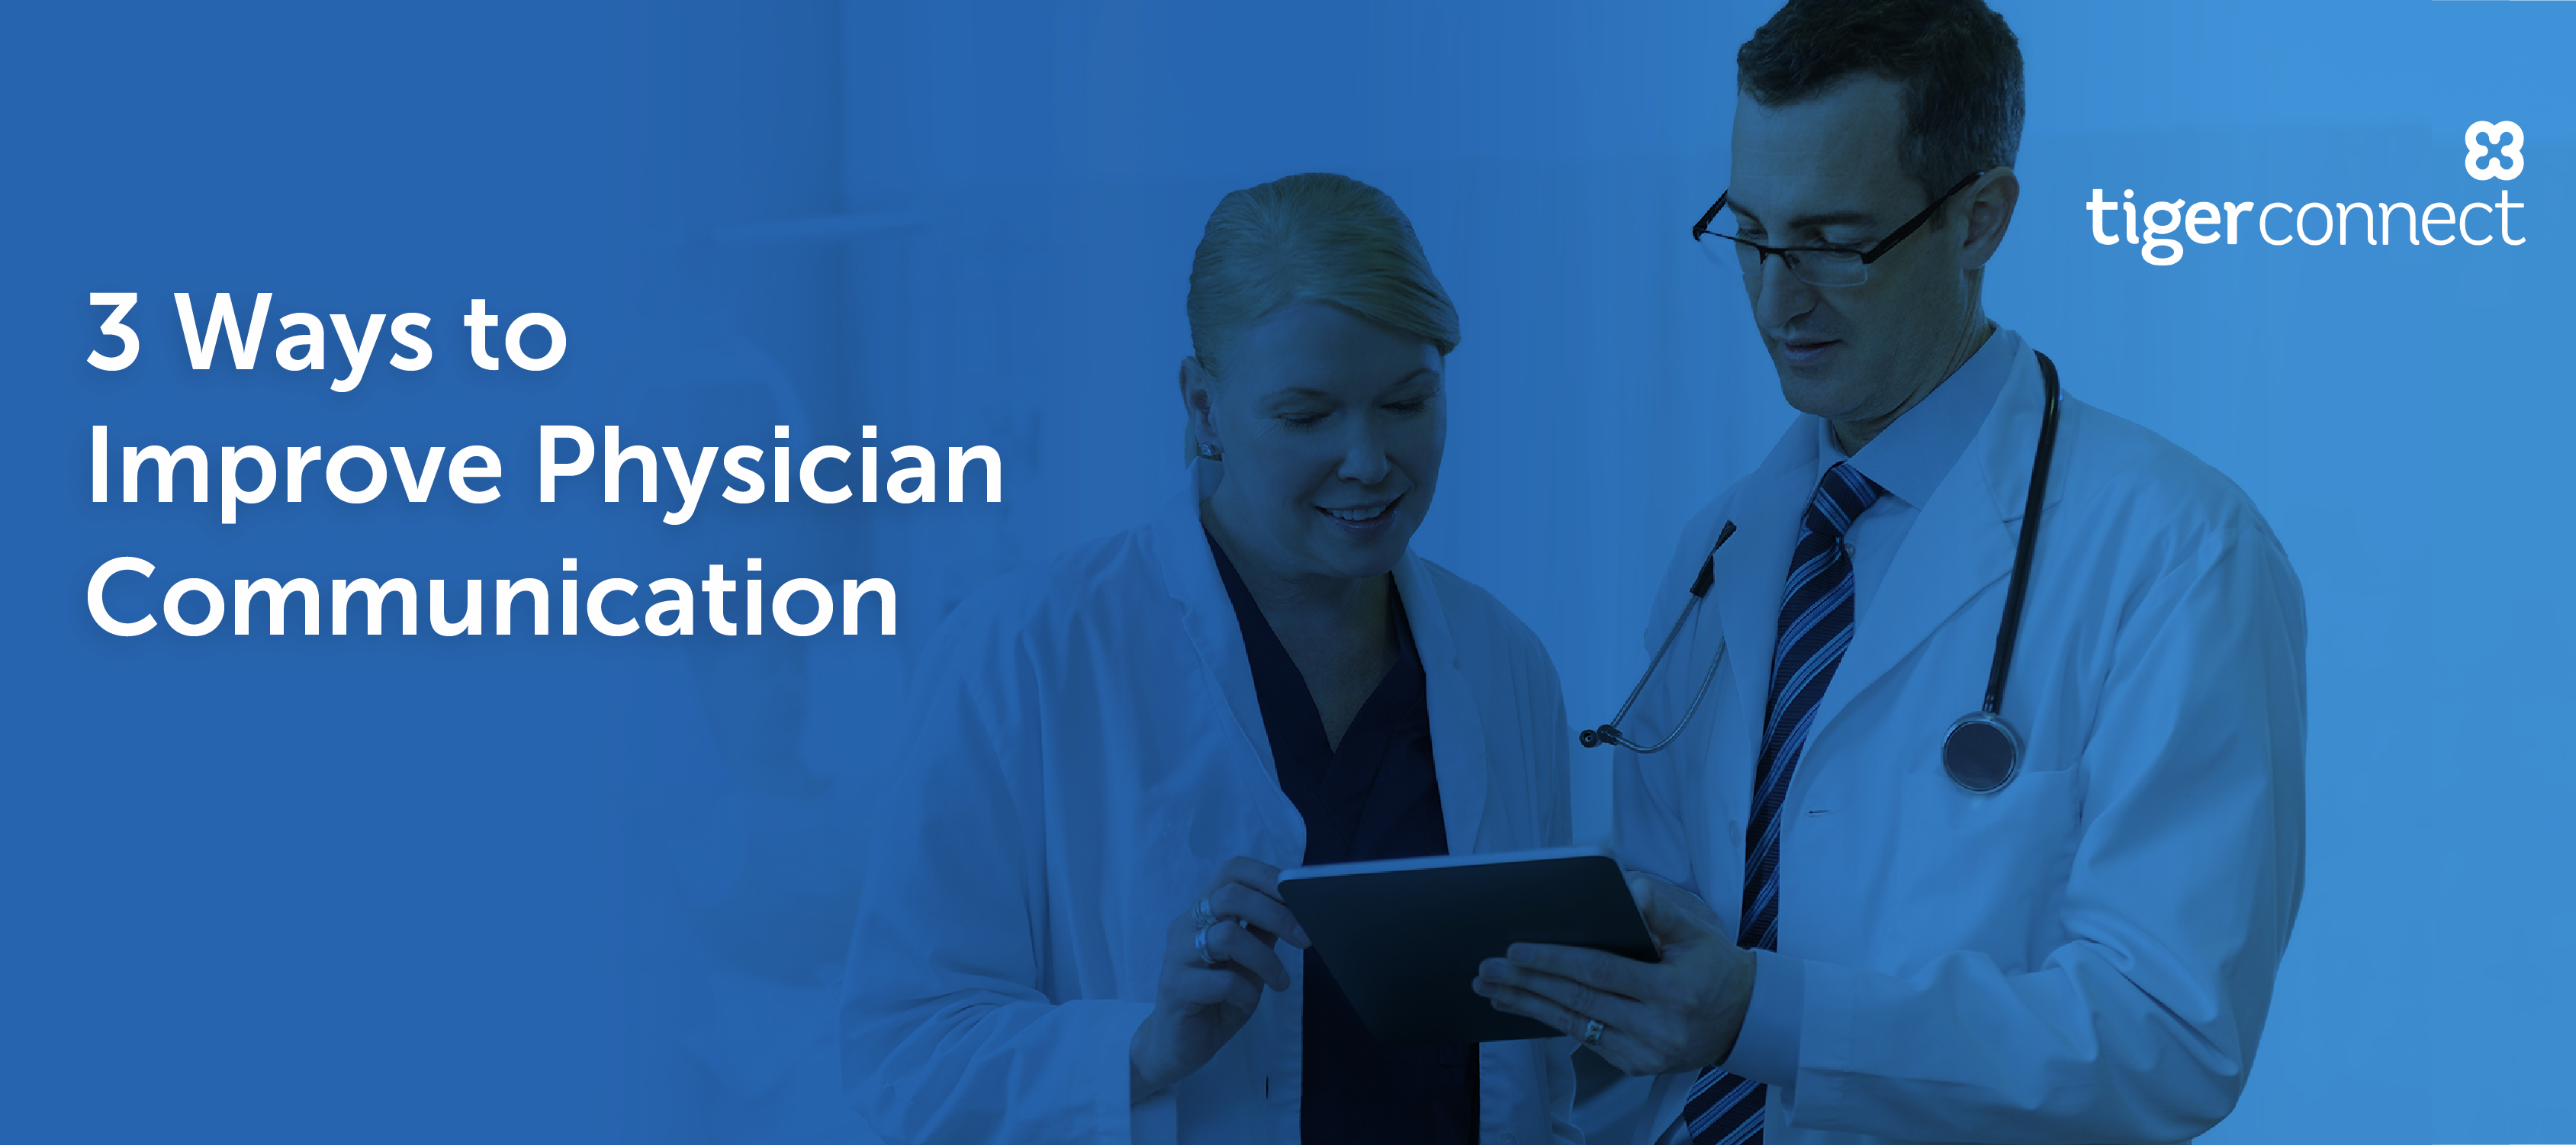 3 Ways to Improve Physician Communication